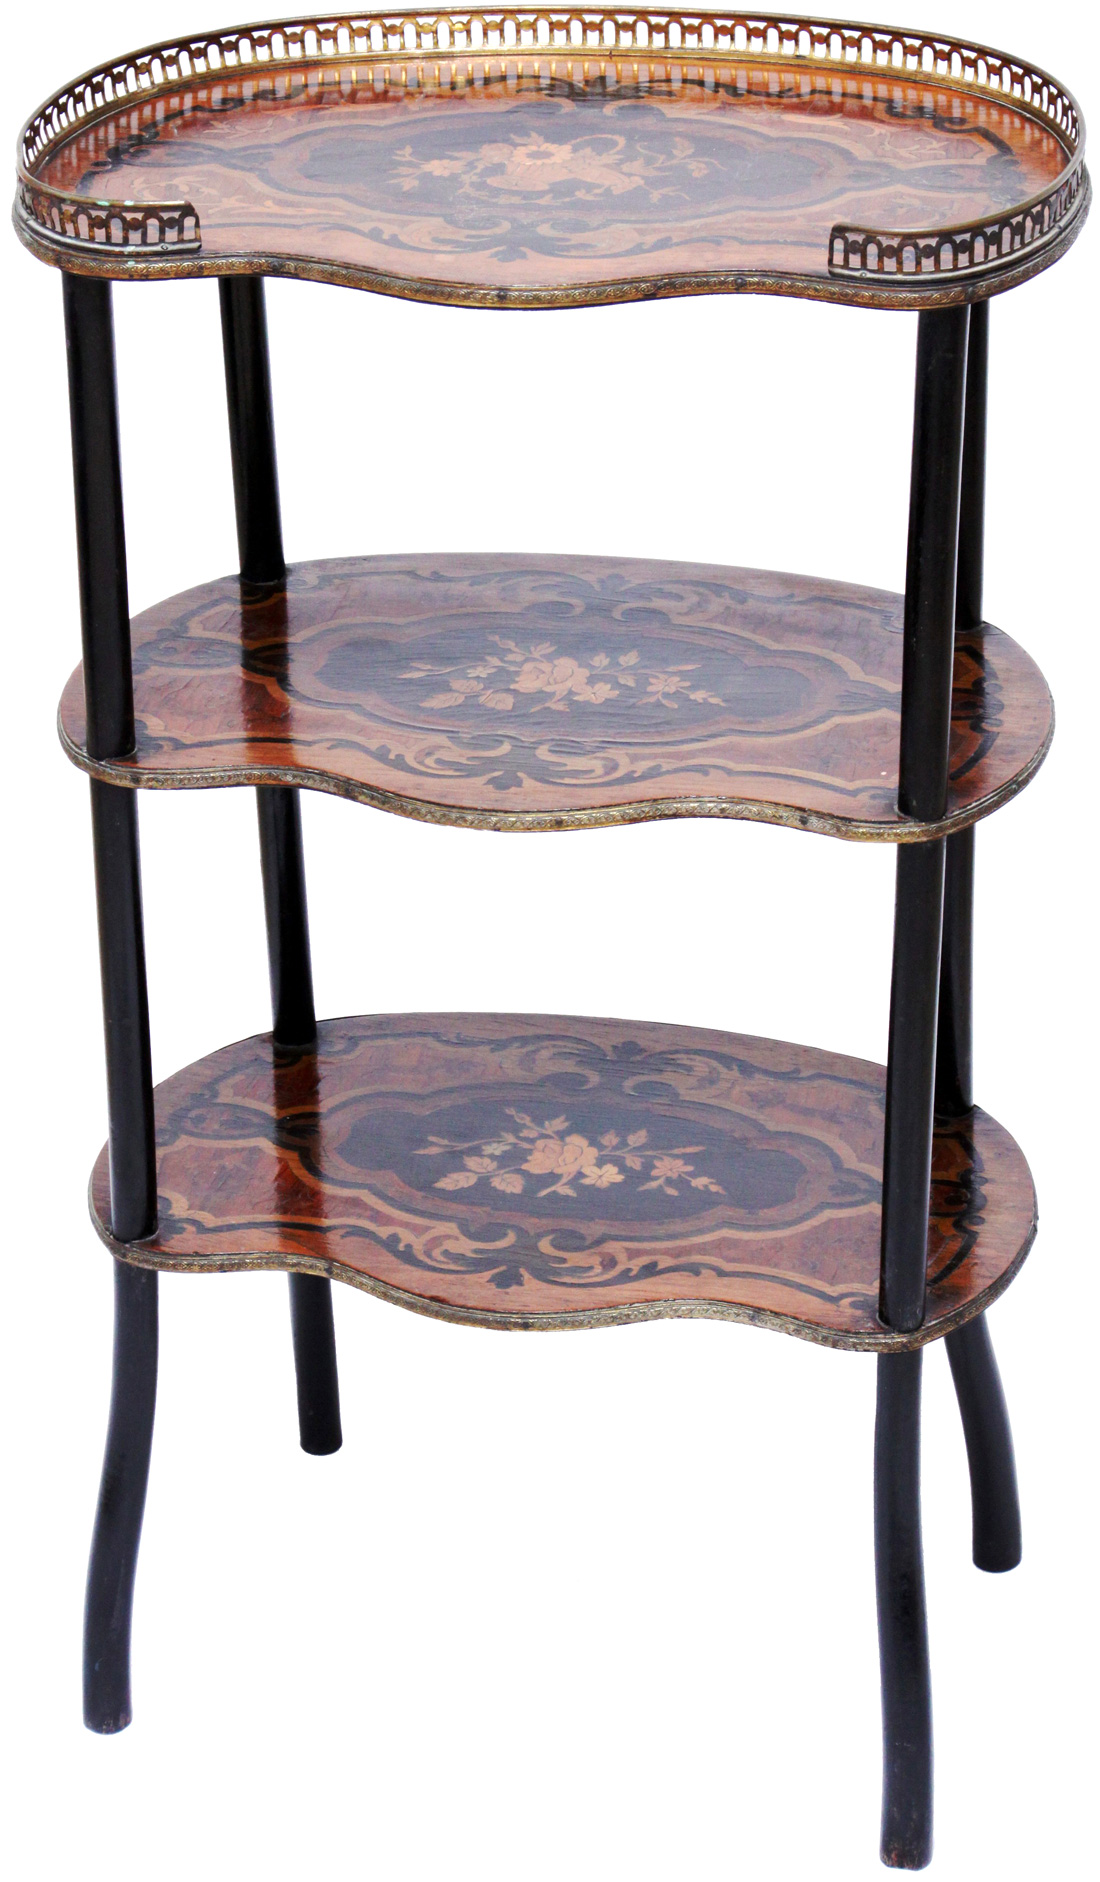 Antique What-not Etagere with Marquetry Shelves - שידת מדפים ויקטוריאנית עתיקה - Back To List of Antique Furniture